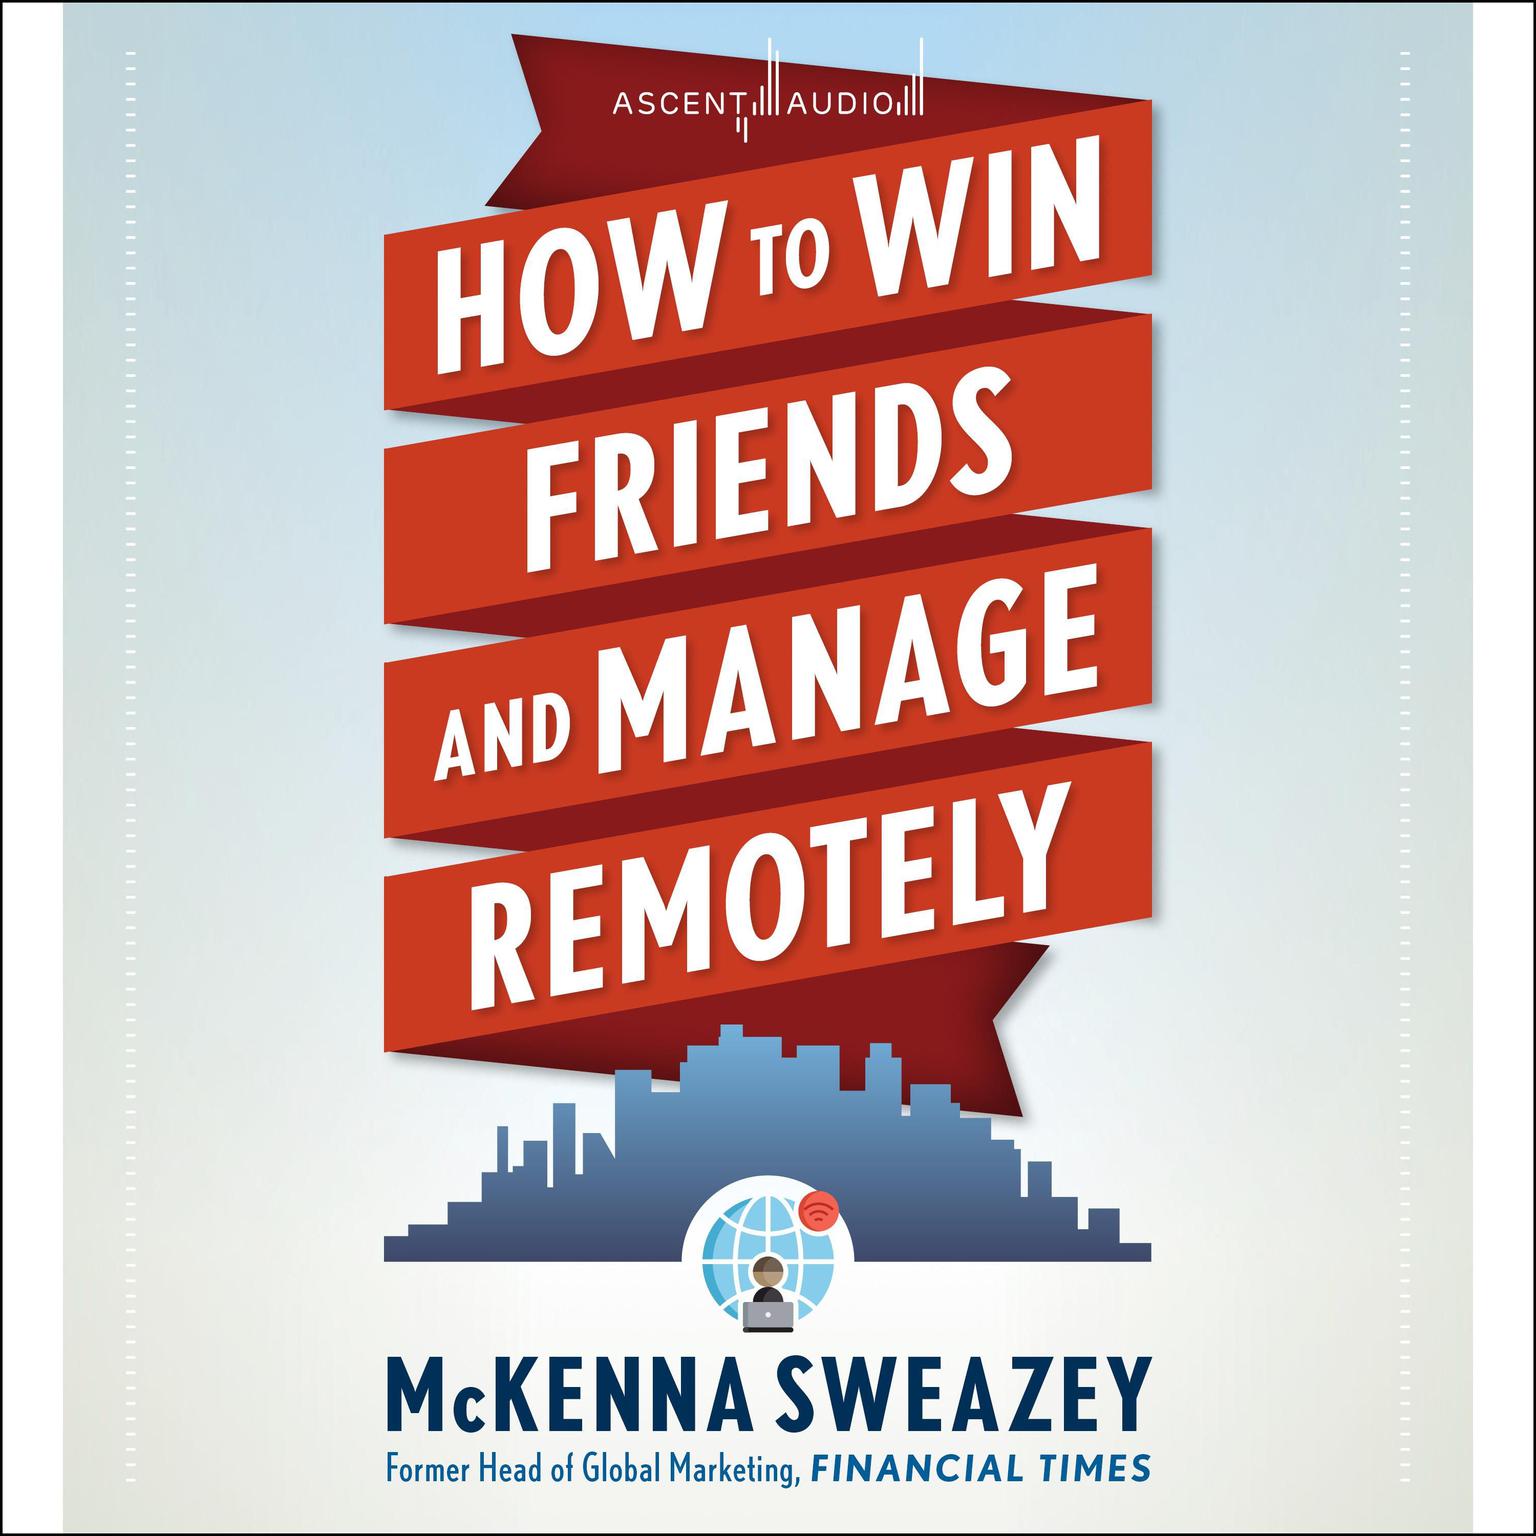 How to Win Friends and Manage Remotely Audiobook, by McKenna Sweazey